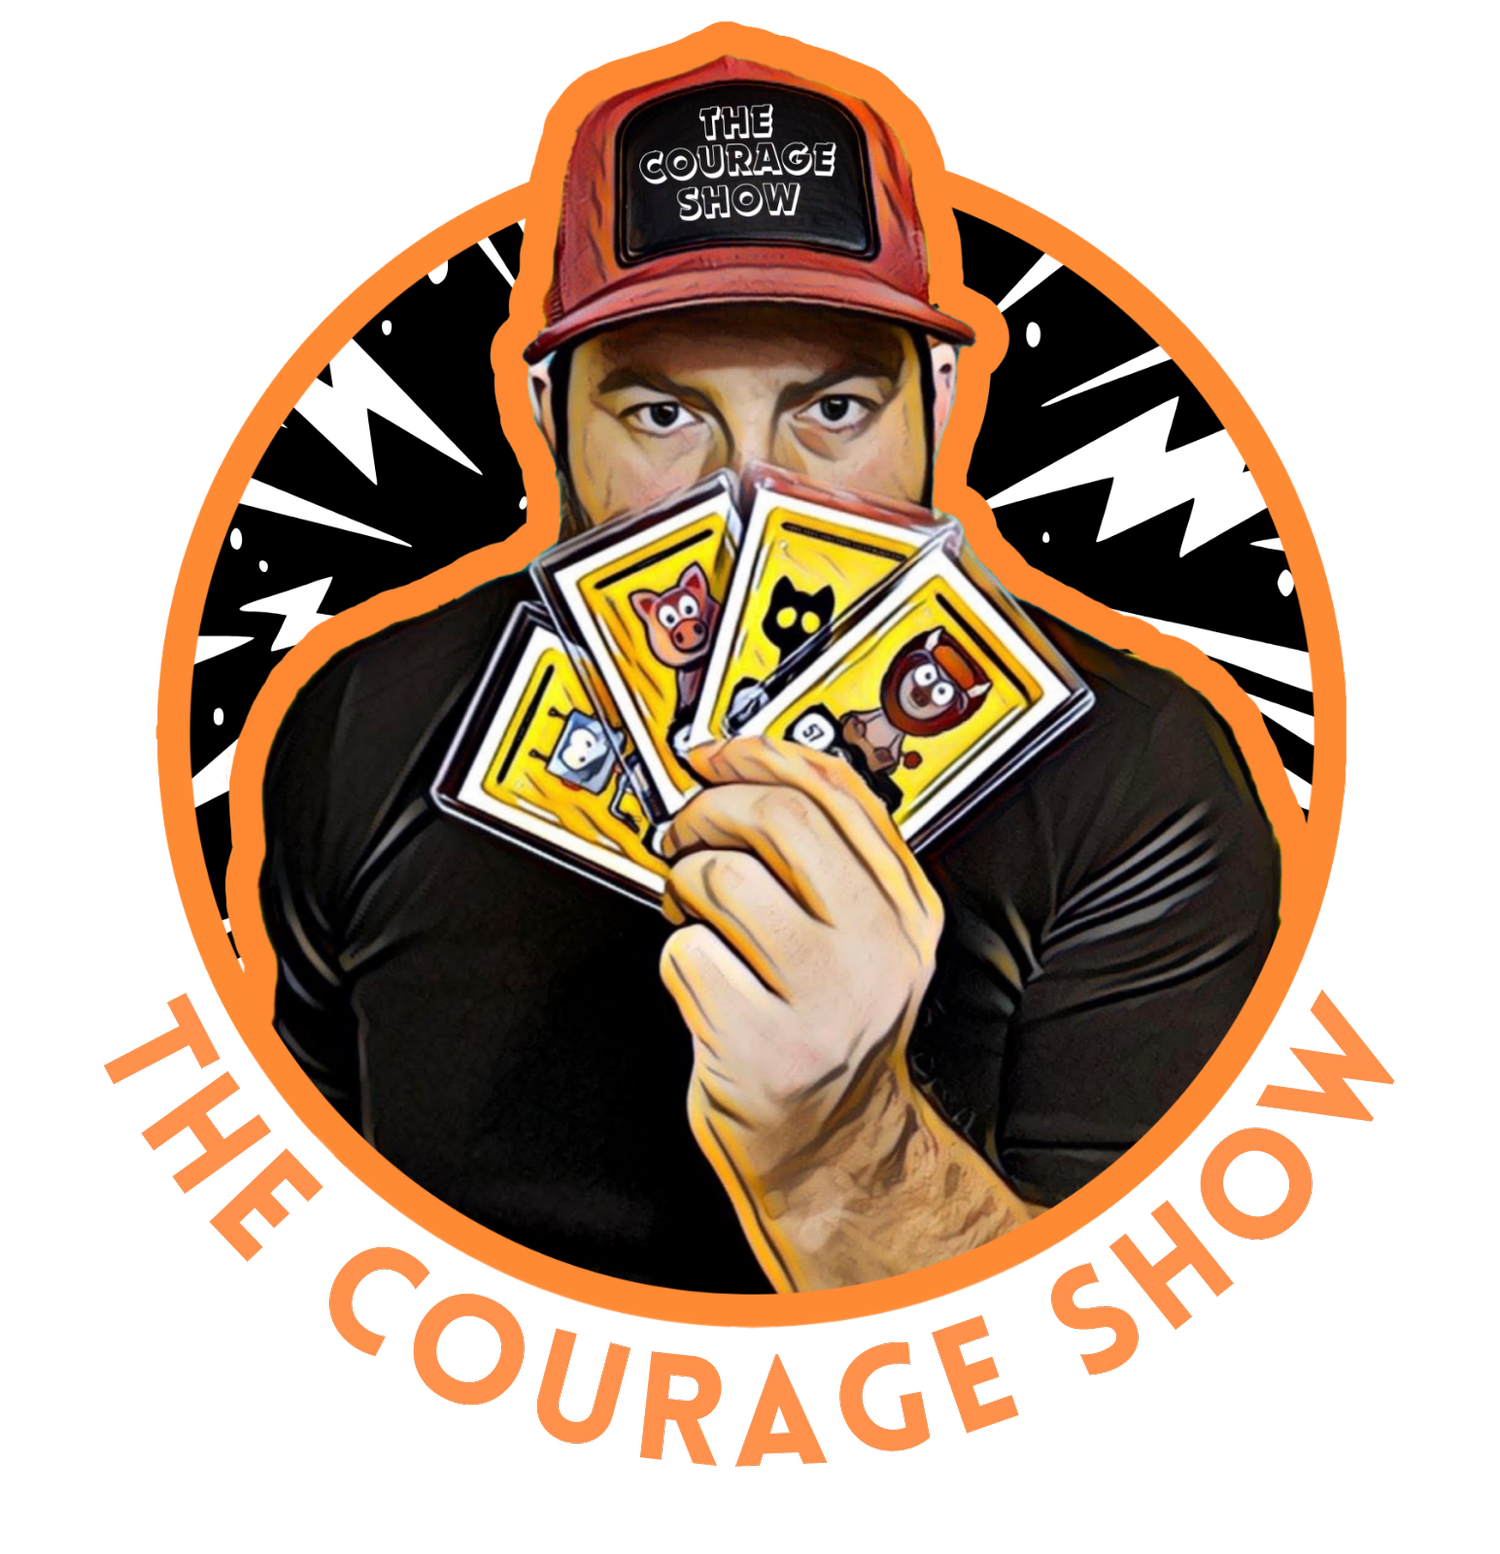 The Courage Show